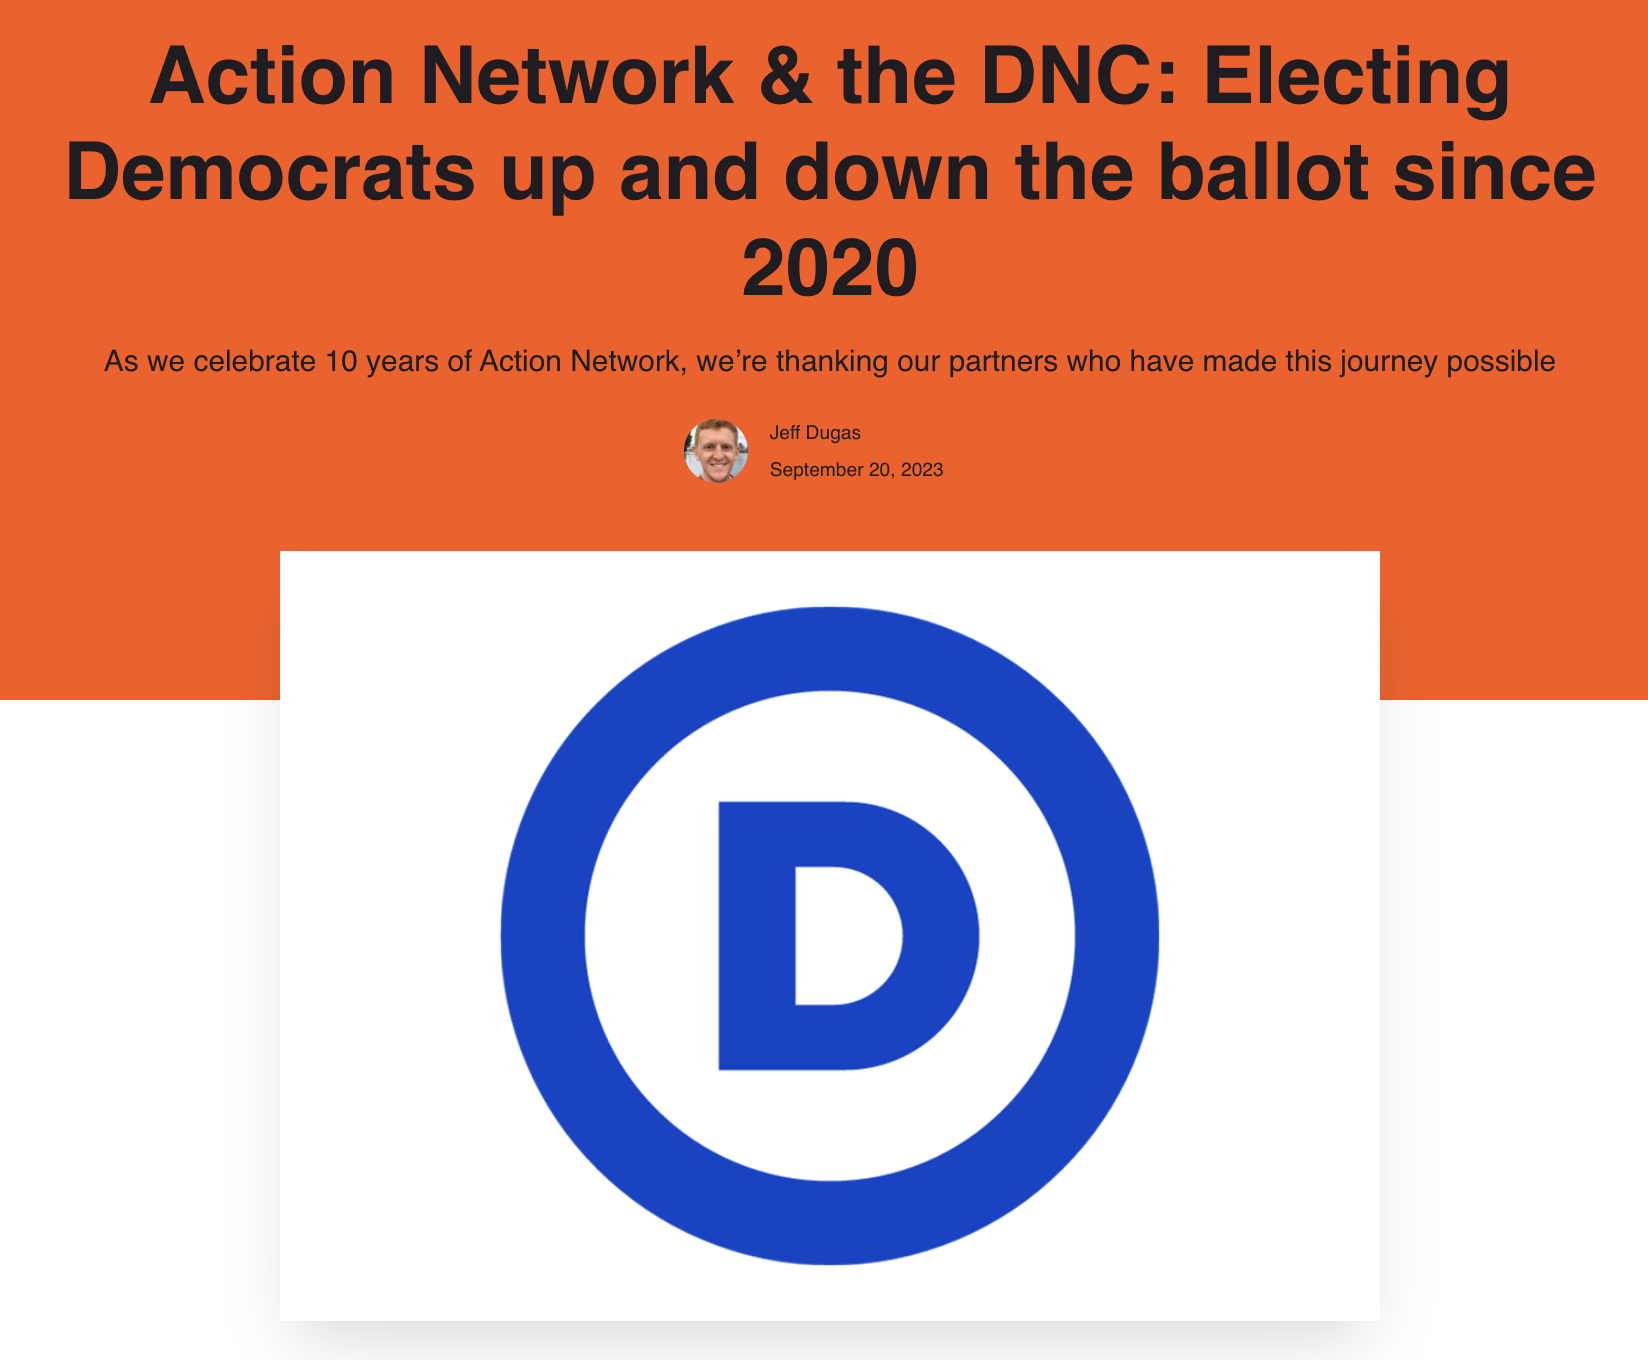 A screenshot of the blog post titled "Action Network & the DNC: Electing Democrats up and down the ballot since 2020"